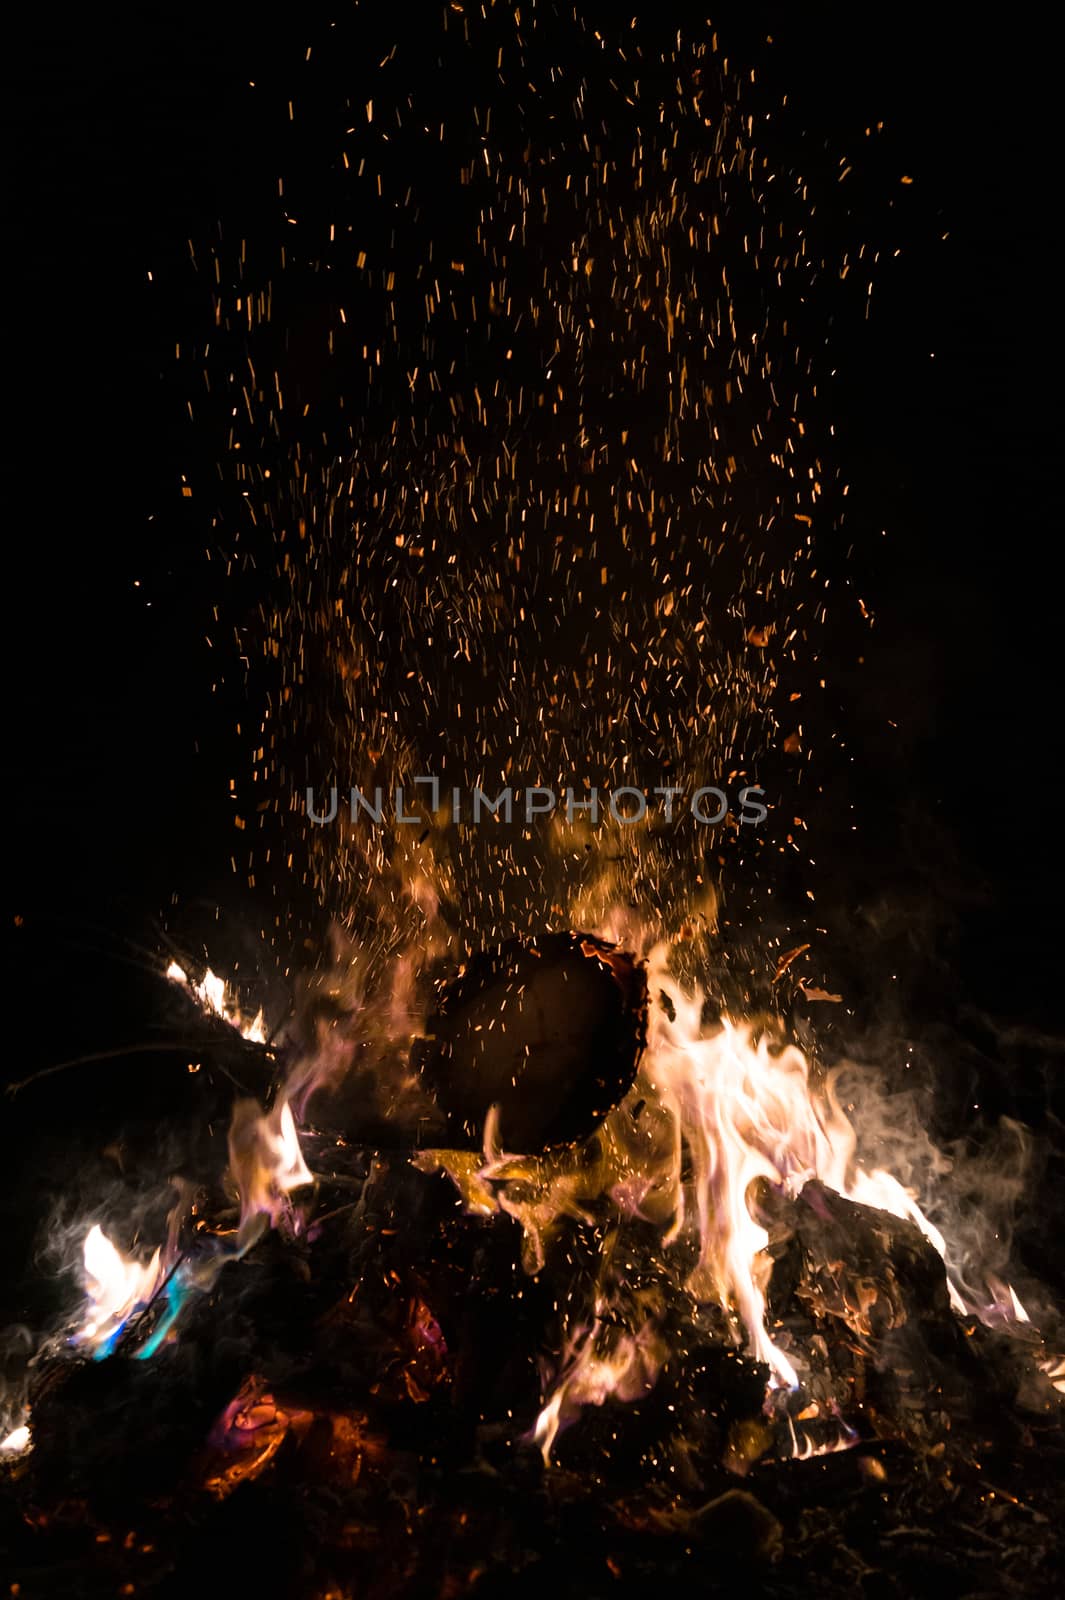 A low light underexposed photo of burning fire. Many sparks and flames. Burning books and wood. 